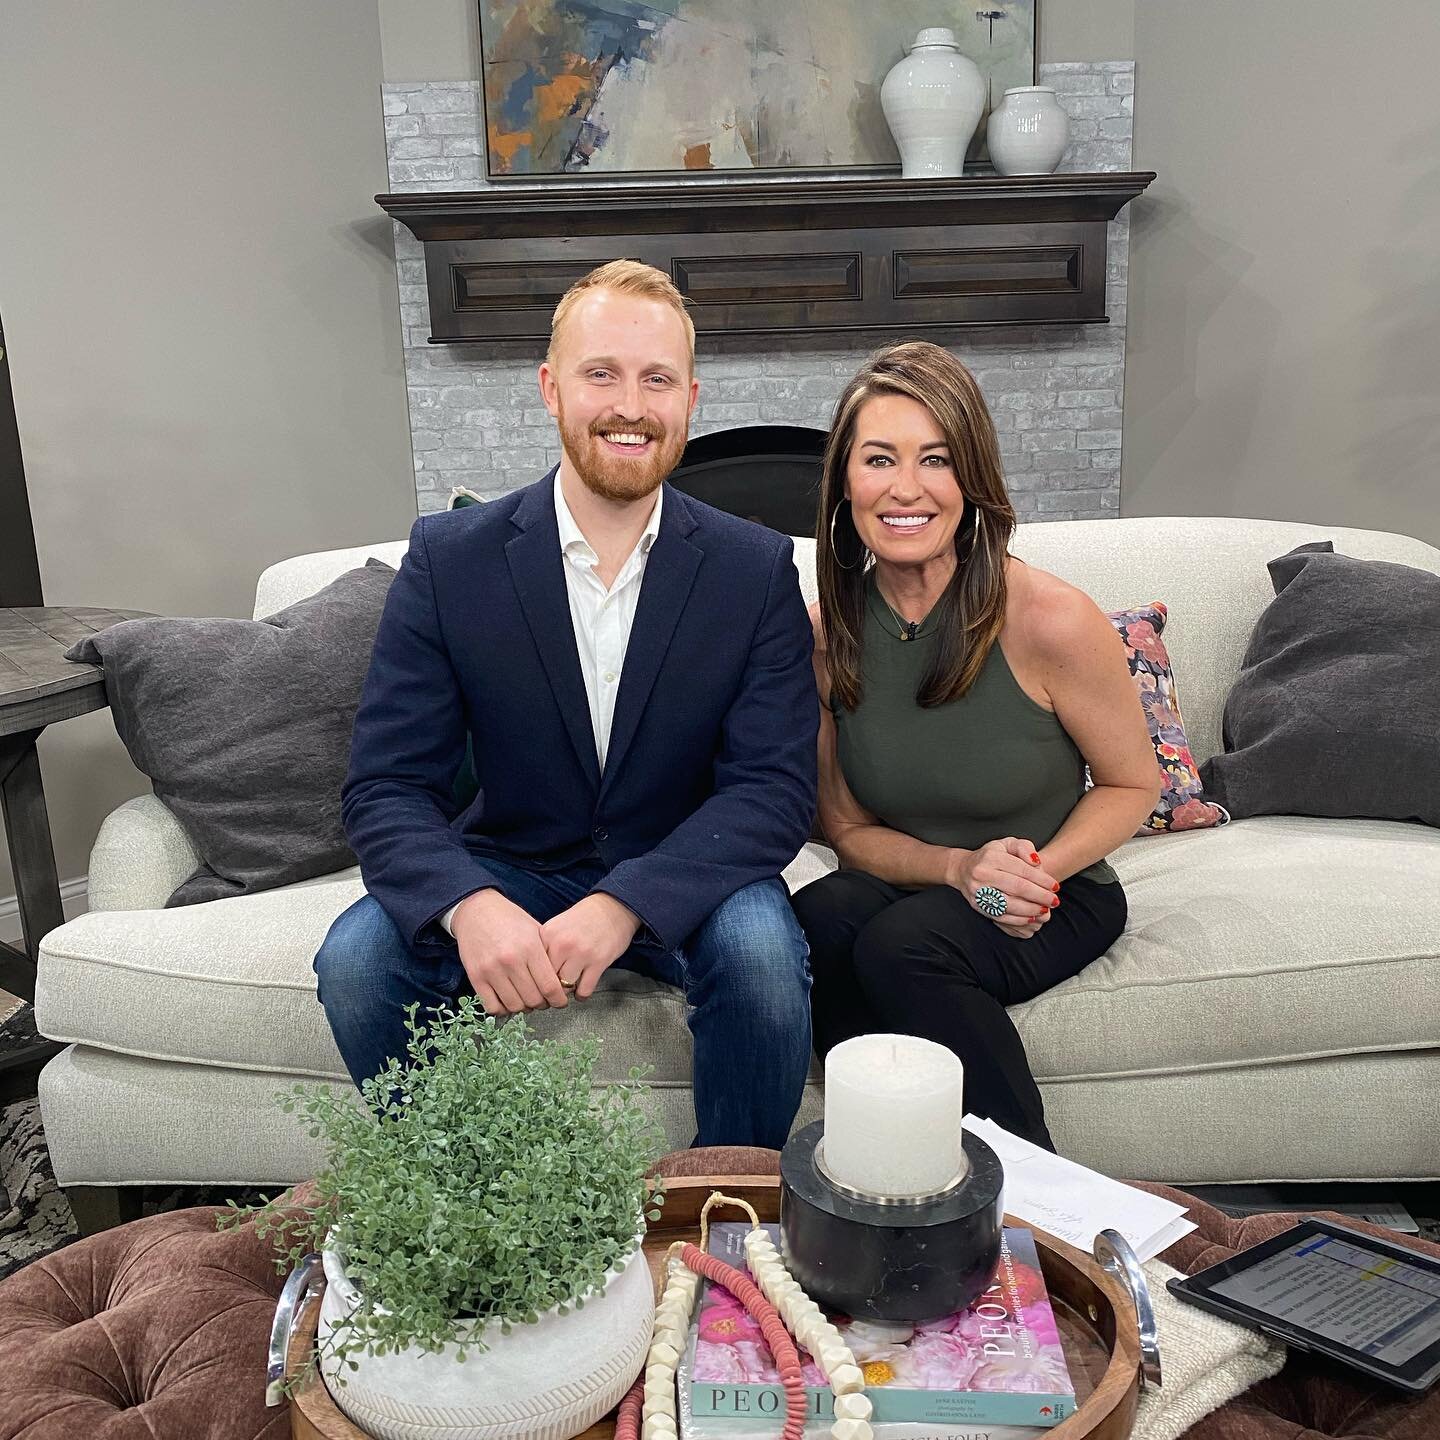 Did anyone catch us on @goodthingsutah today?? 

We&rsquo;re celebrating with a donation match! All donations will be doubled up to $2000 thanks to @lifeseasons 

Click our link in bio, and find a project that speaks to you!